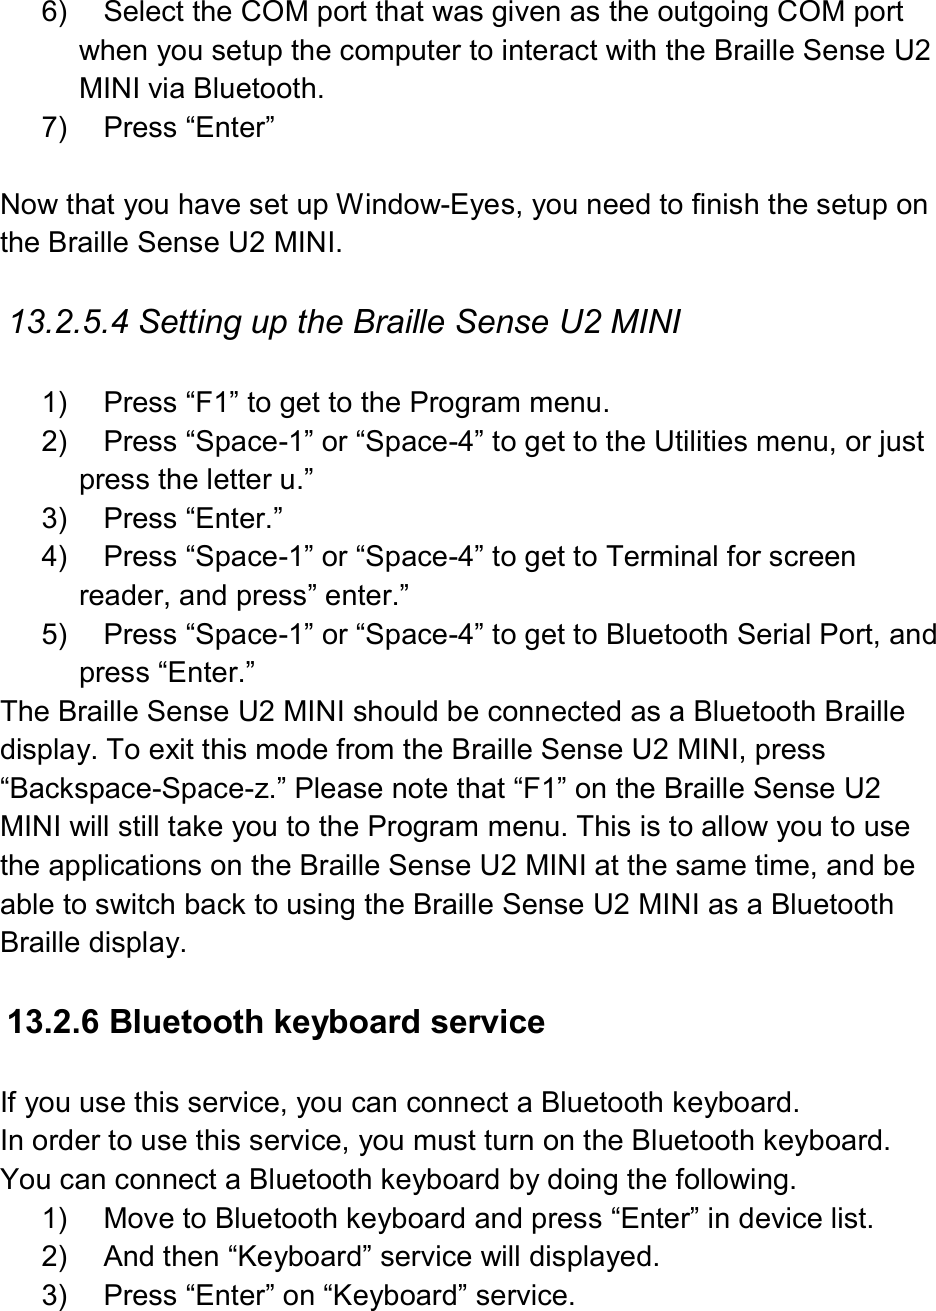  6)  Select the COM port that was given as the outgoing COM port when you setup the computer to interact with the Braille Sense U2 MINI via Bluetooth. 7)  Press “Enter”  Now that you have set up Window-Eyes, you need to finish the setup on the Braille Sense U2 MINI.  13.2.5.4 Setting up the Braille Sense U2 MINI  1)  Press “F1” to get to the Program menu. 2)  Press “Space-1” or “Space-4” to get to the Utilities menu, or just press the letter u.” 3)  Press “Enter.” 4)  Press “Space-1” or “Space-4” to get to Terminal for screen reader, and press” enter.” 5)  Press “Space-1” or “Space-4” to get to Bluetooth Serial Port, and press “Enter.” The Braille Sense U2 MINI should be connected as a Bluetooth Braille display. To exit this mode from the Braille Sense U2 MINI, press “Backspace-Space-z.” Please note that “F1” on the Braille Sense U2 MINI will still take you to the Program menu. This is to allow you to use the applications on the Braille Sense U2 MINI at the same time, and be able to switch back to using the Braille Sense U2 MINI as a Bluetooth Braille display.  13.2.6 Bluetooth keyboard service  If you use this service, you can connect a Bluetooth keyboard.   In order to use this service, you must turn on the Bluetooth keyboard. You can connect a Bluetooth keyboard by doing the following. 1)  Move to Bluetooth keyboard and press “Enter” in device list. 2)  And then “Keyboard” service will displayed. 3)  Press “Enter” on “Keyboard” service. 